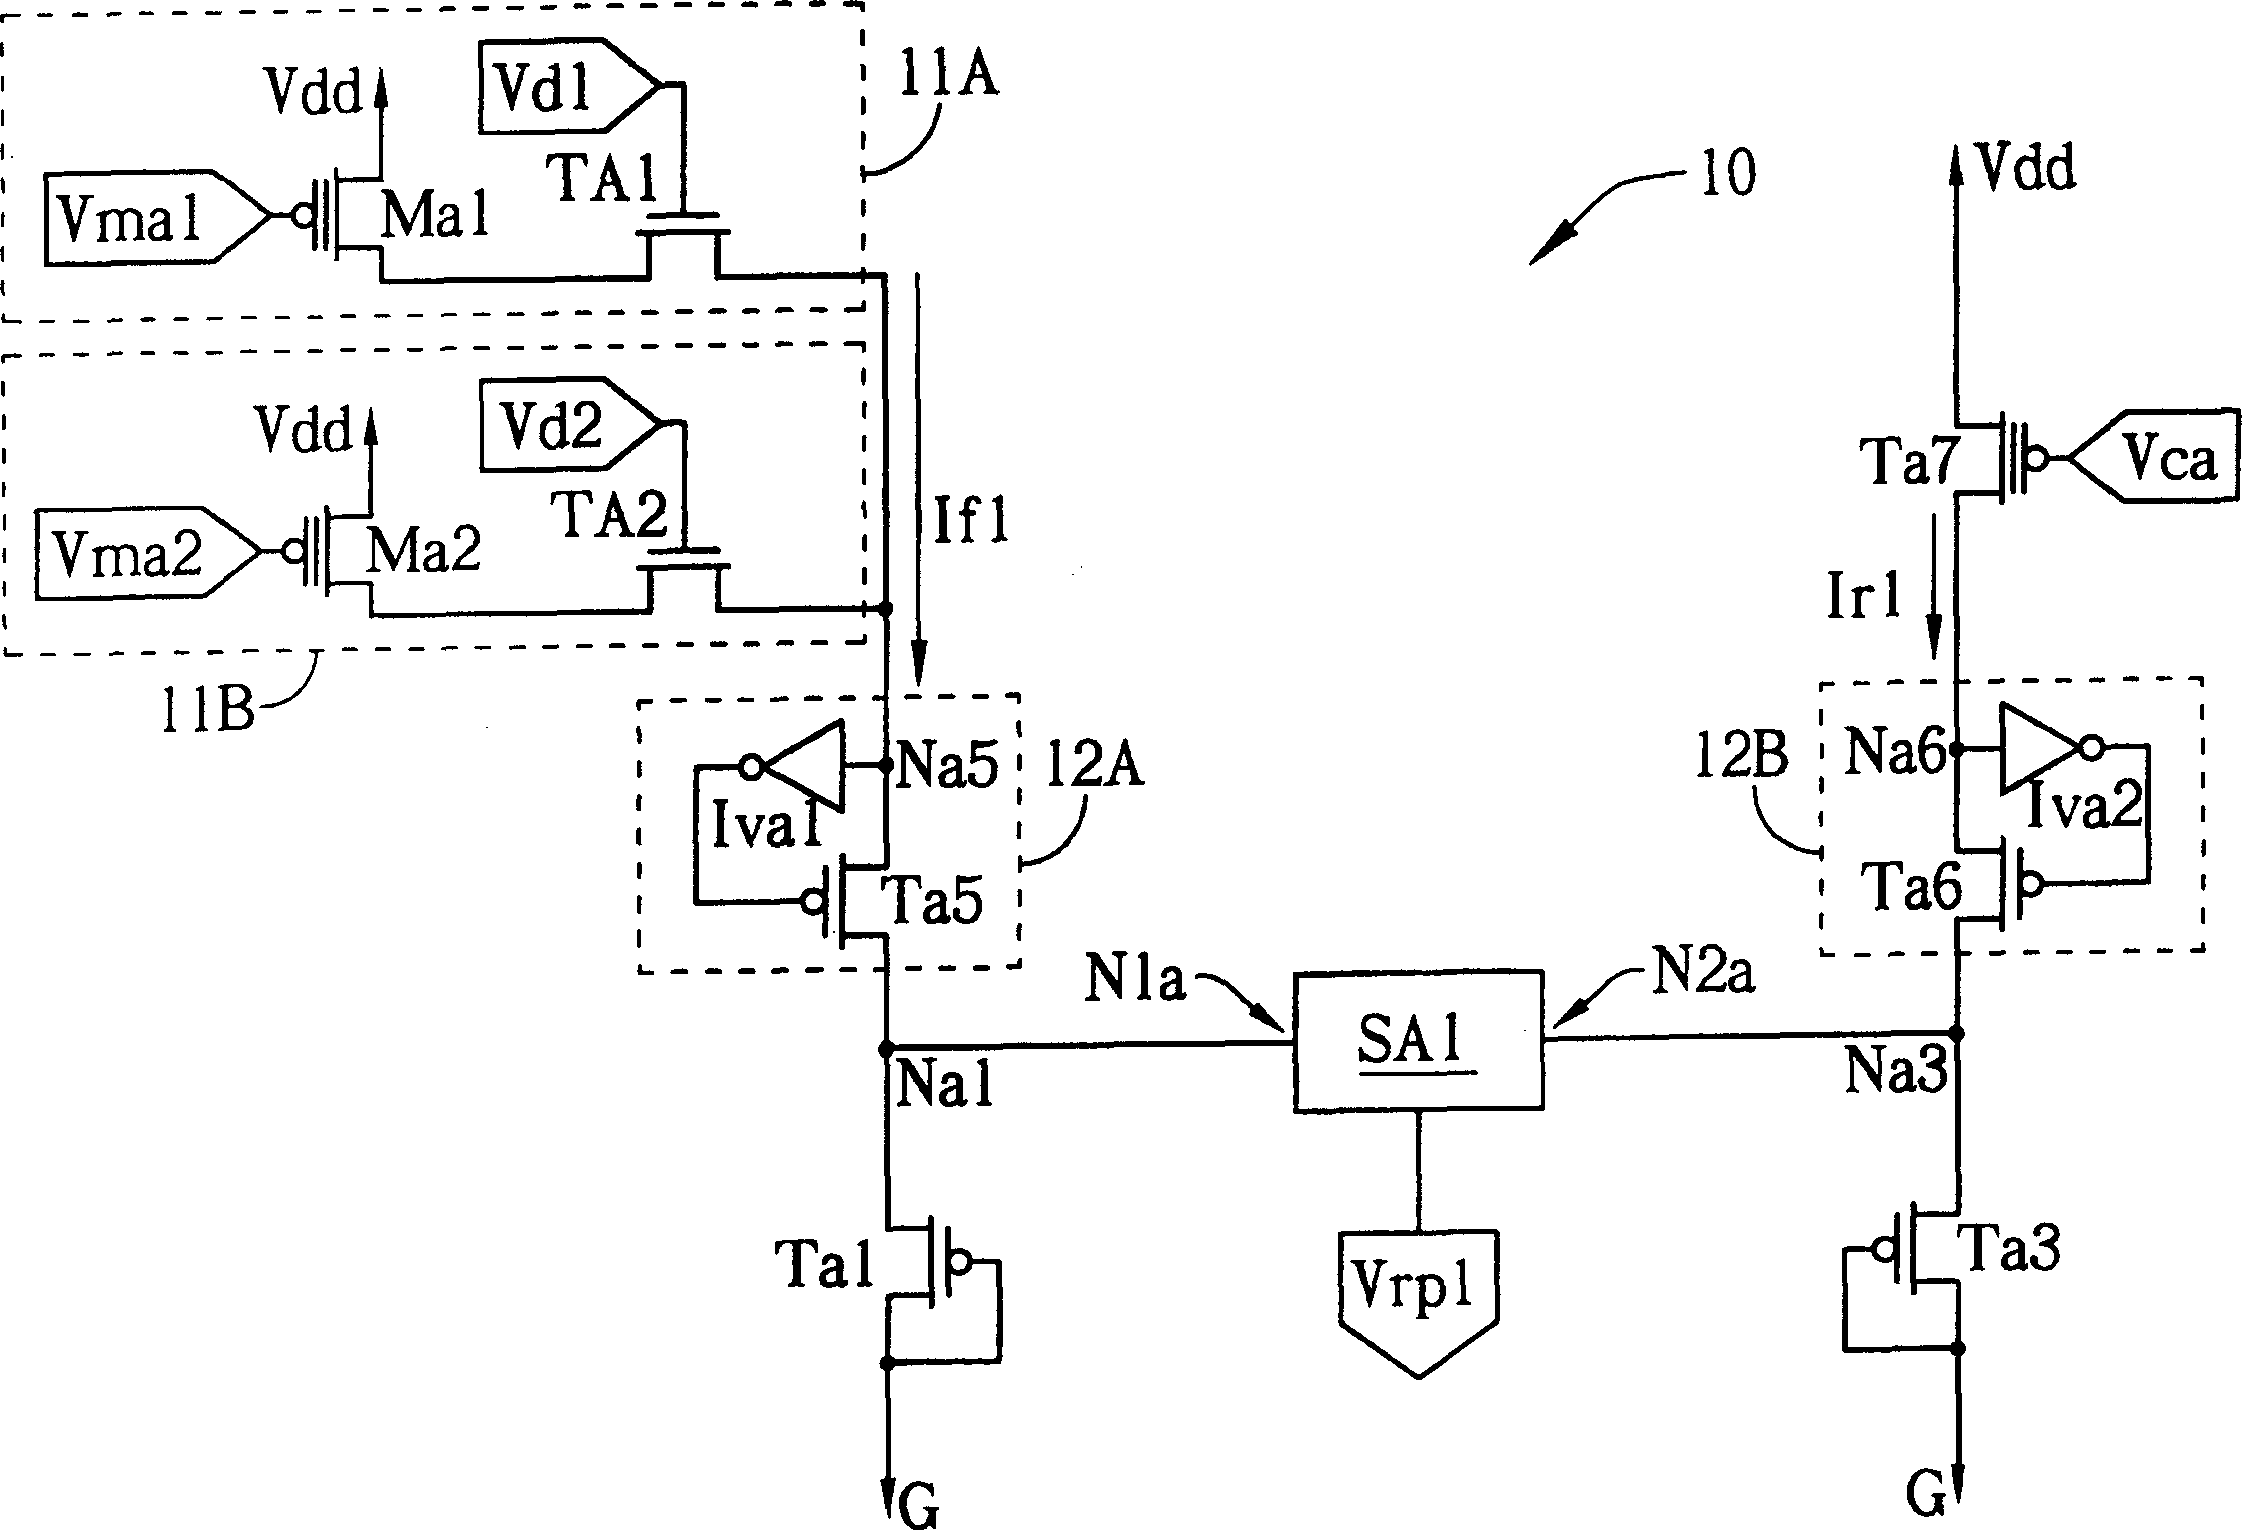 Memory with two-stage read-out amplifier carrying extra load unit